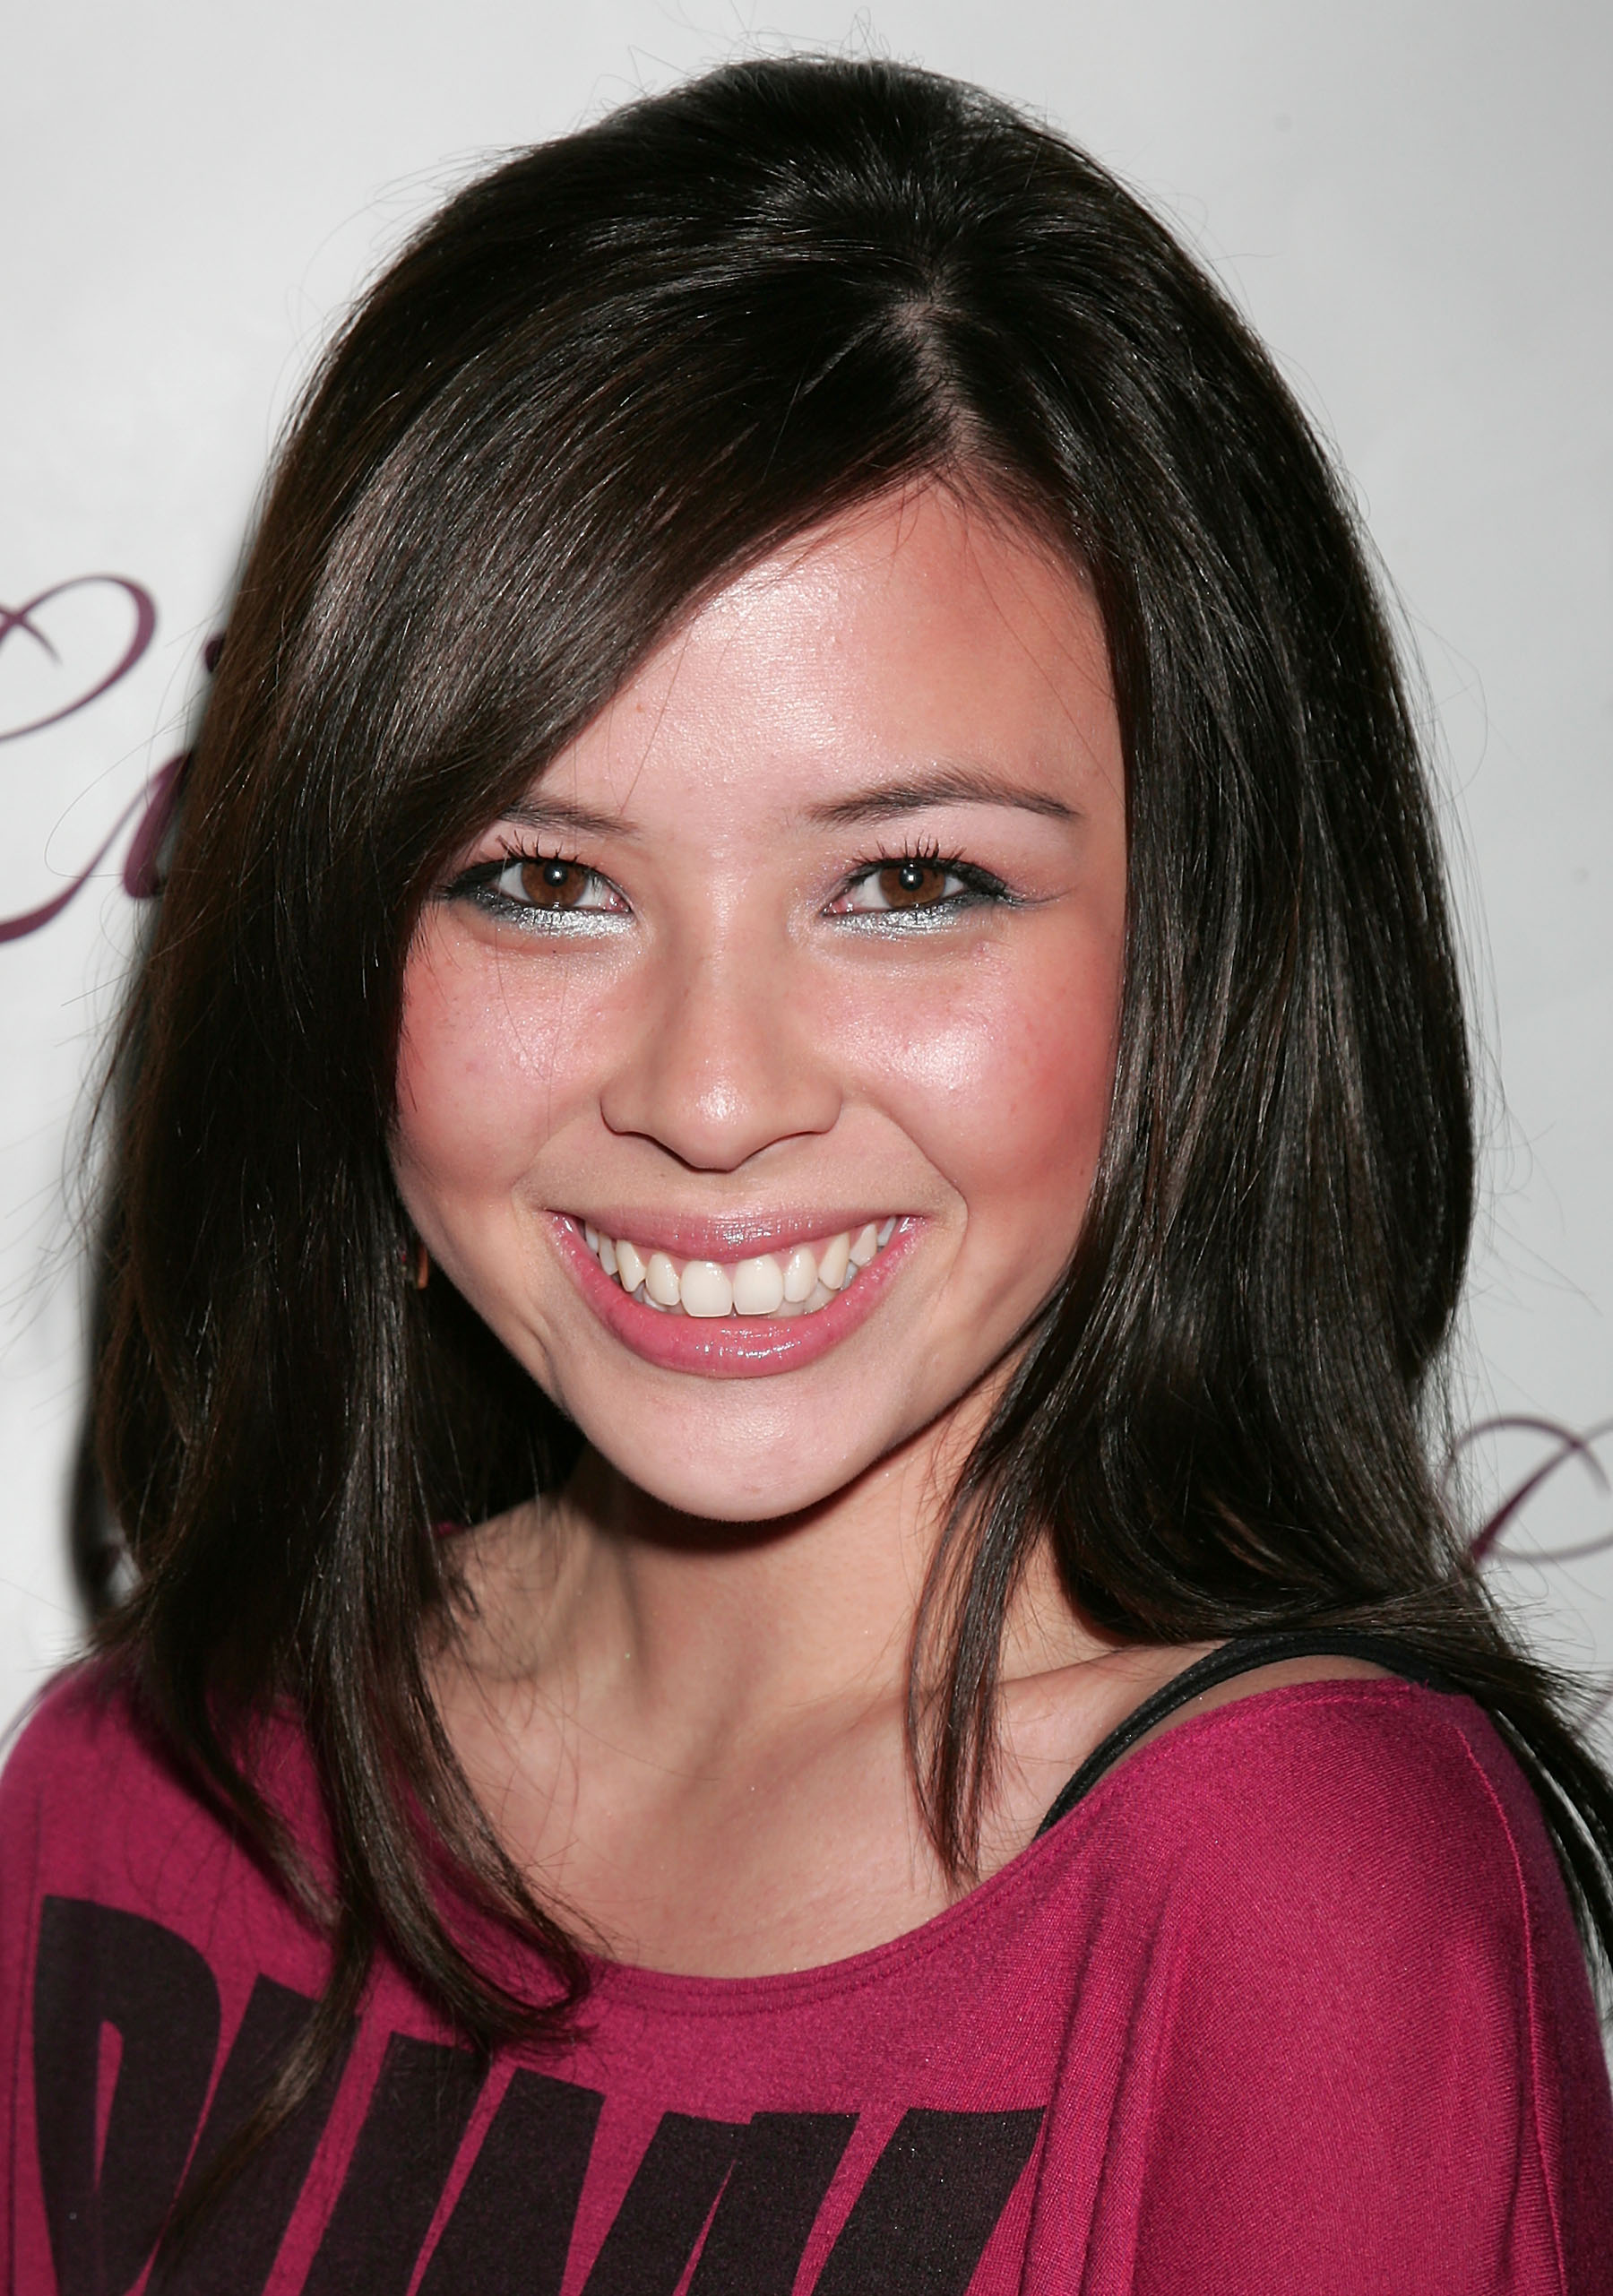 Malese Jow Image Thecelebritypix